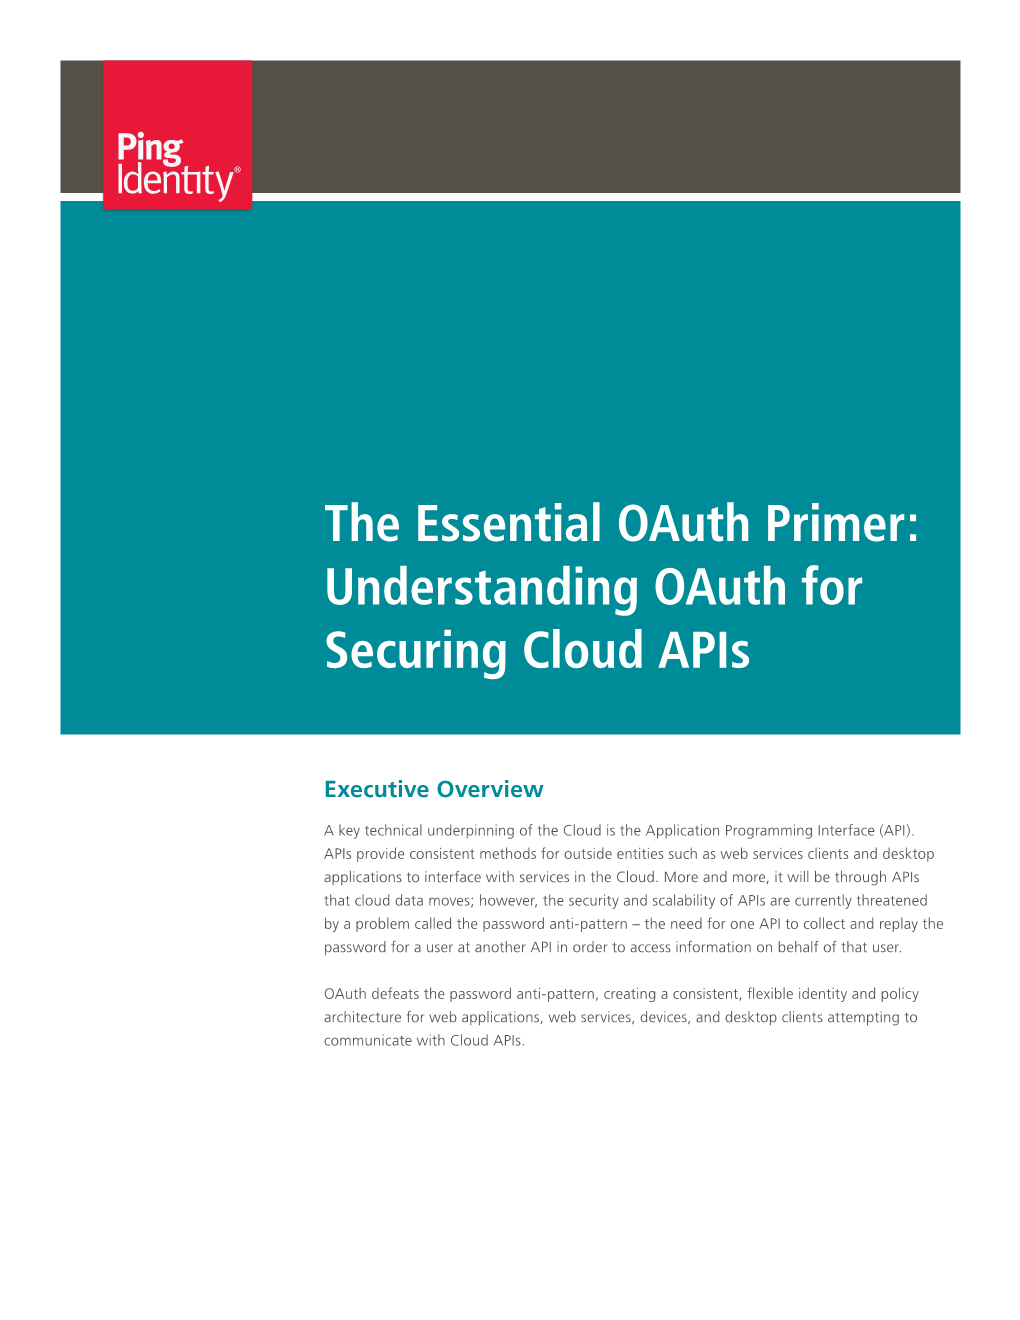 The Essential Oauth Primer: Understanding Oauth for Securing Cloud Apis